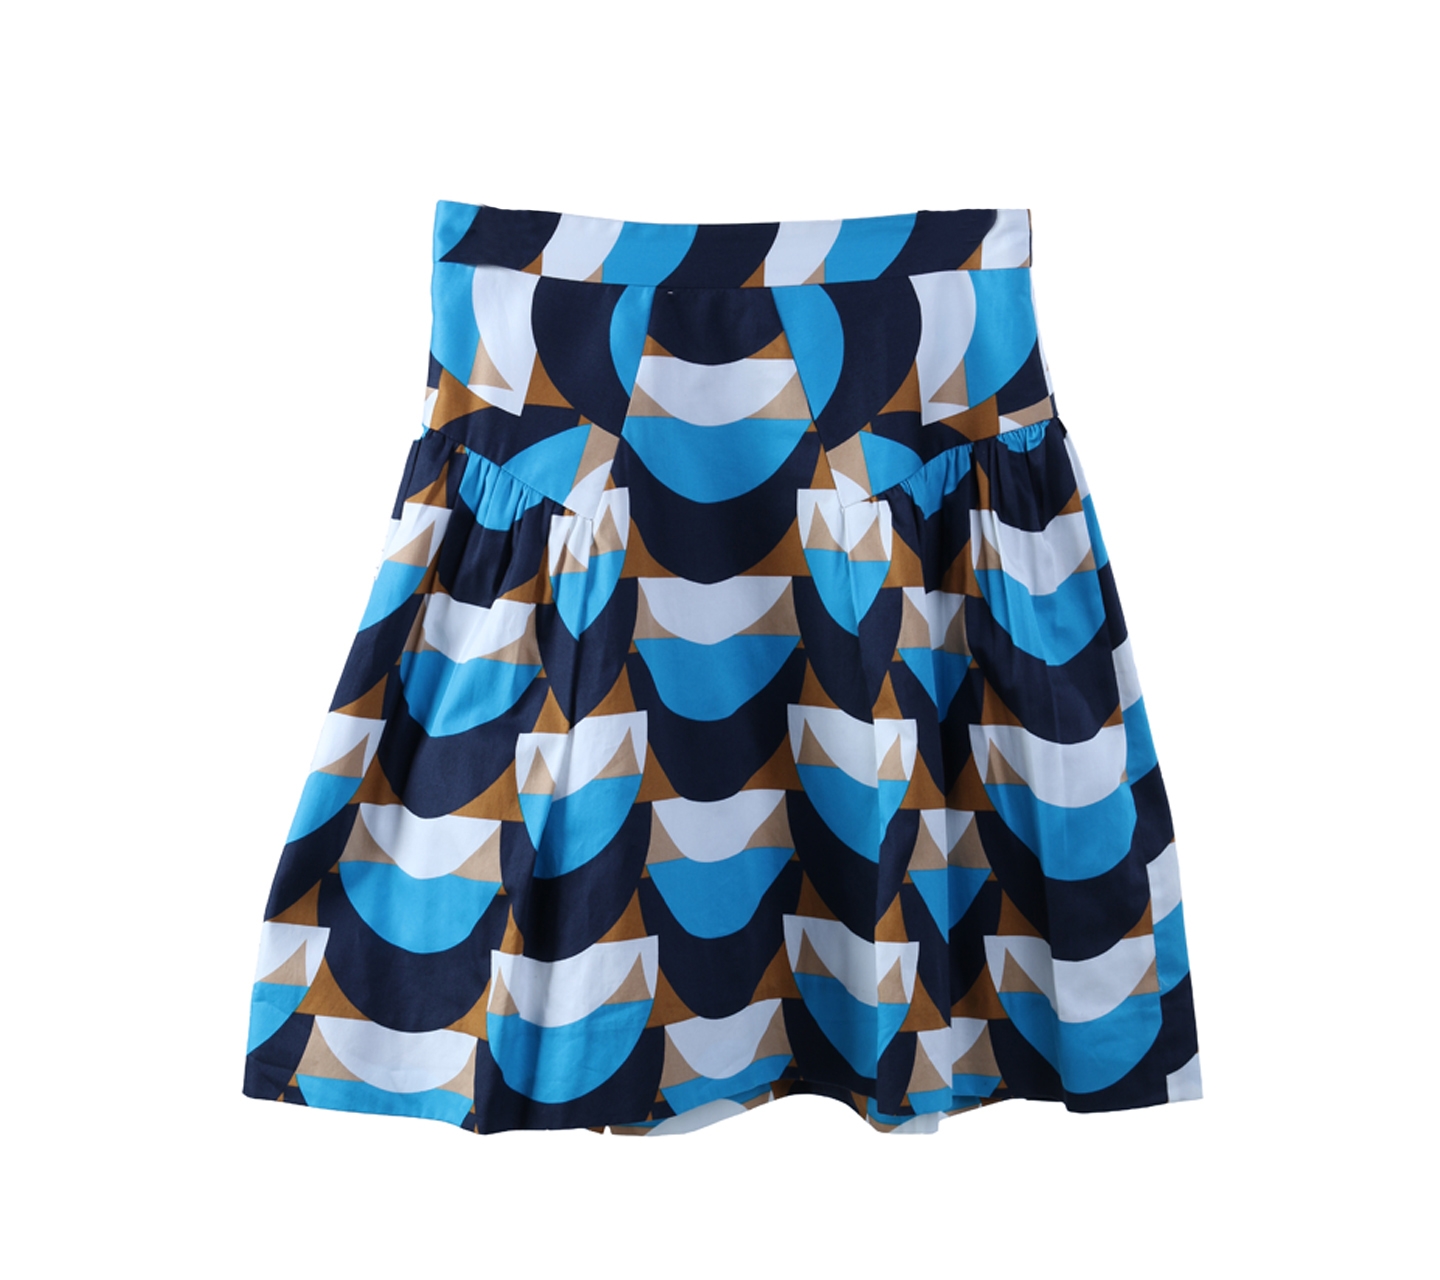 Milly Multi Colour Patterned Midi Skirt